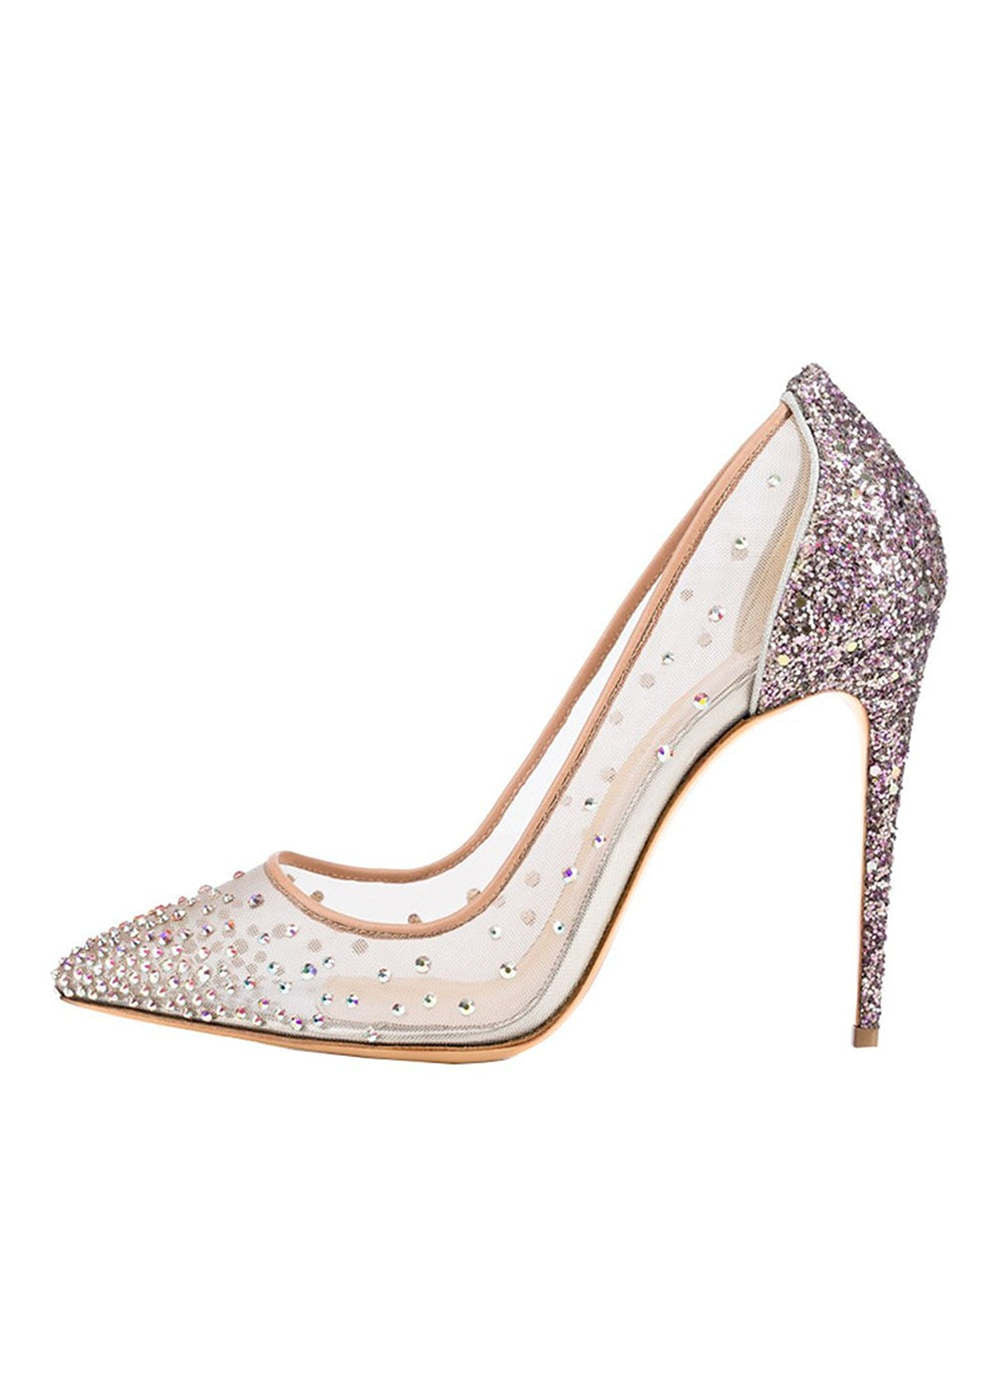 Stiletto Heel Mesh and Crystal Pumps Wedding Shoes